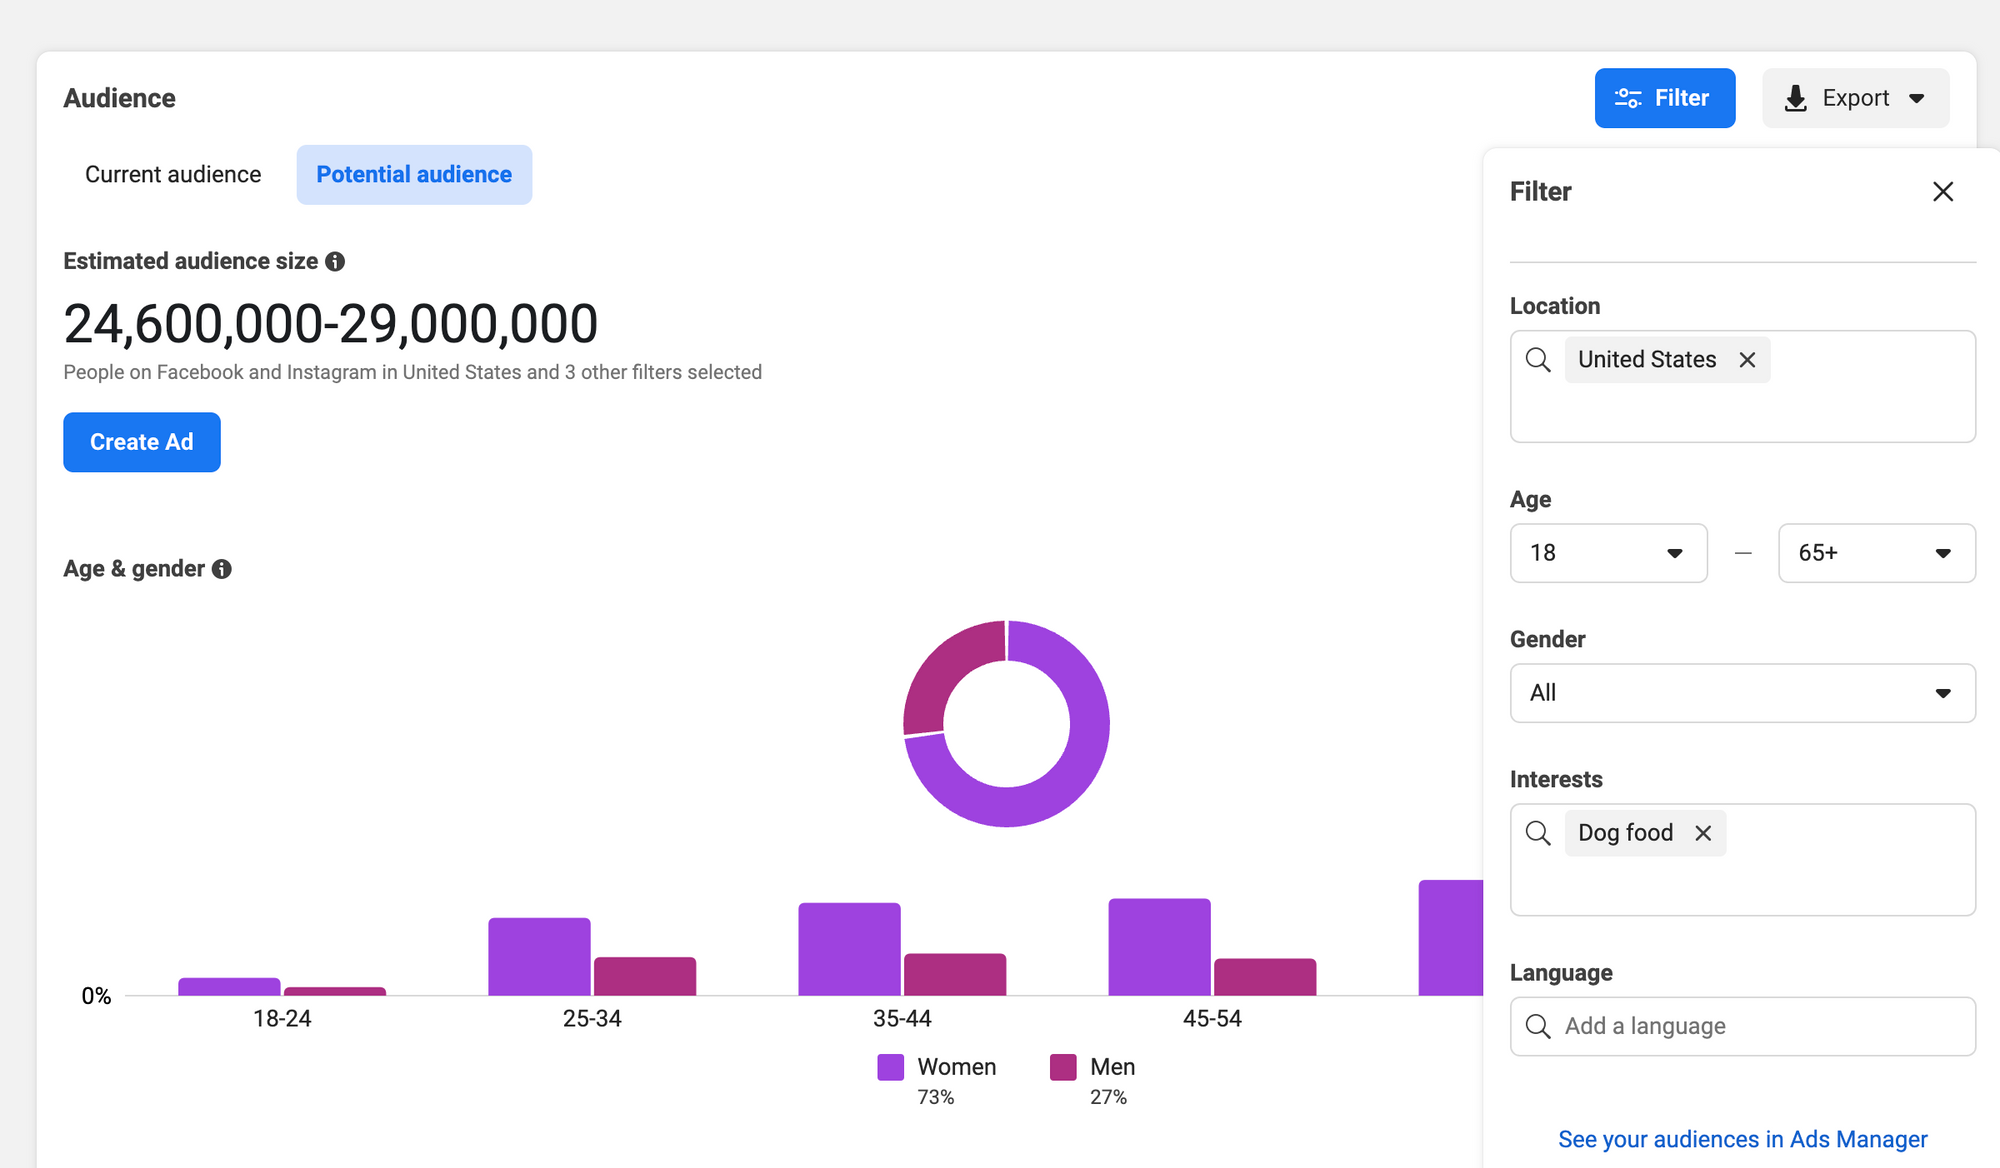 A screenshot of Facebook Audience Insights showing and estimated potential audience size of 24,600,00 to 29,000,000 for people who live in the United States between the ages of 18 and 65+ and are interested in dog food.